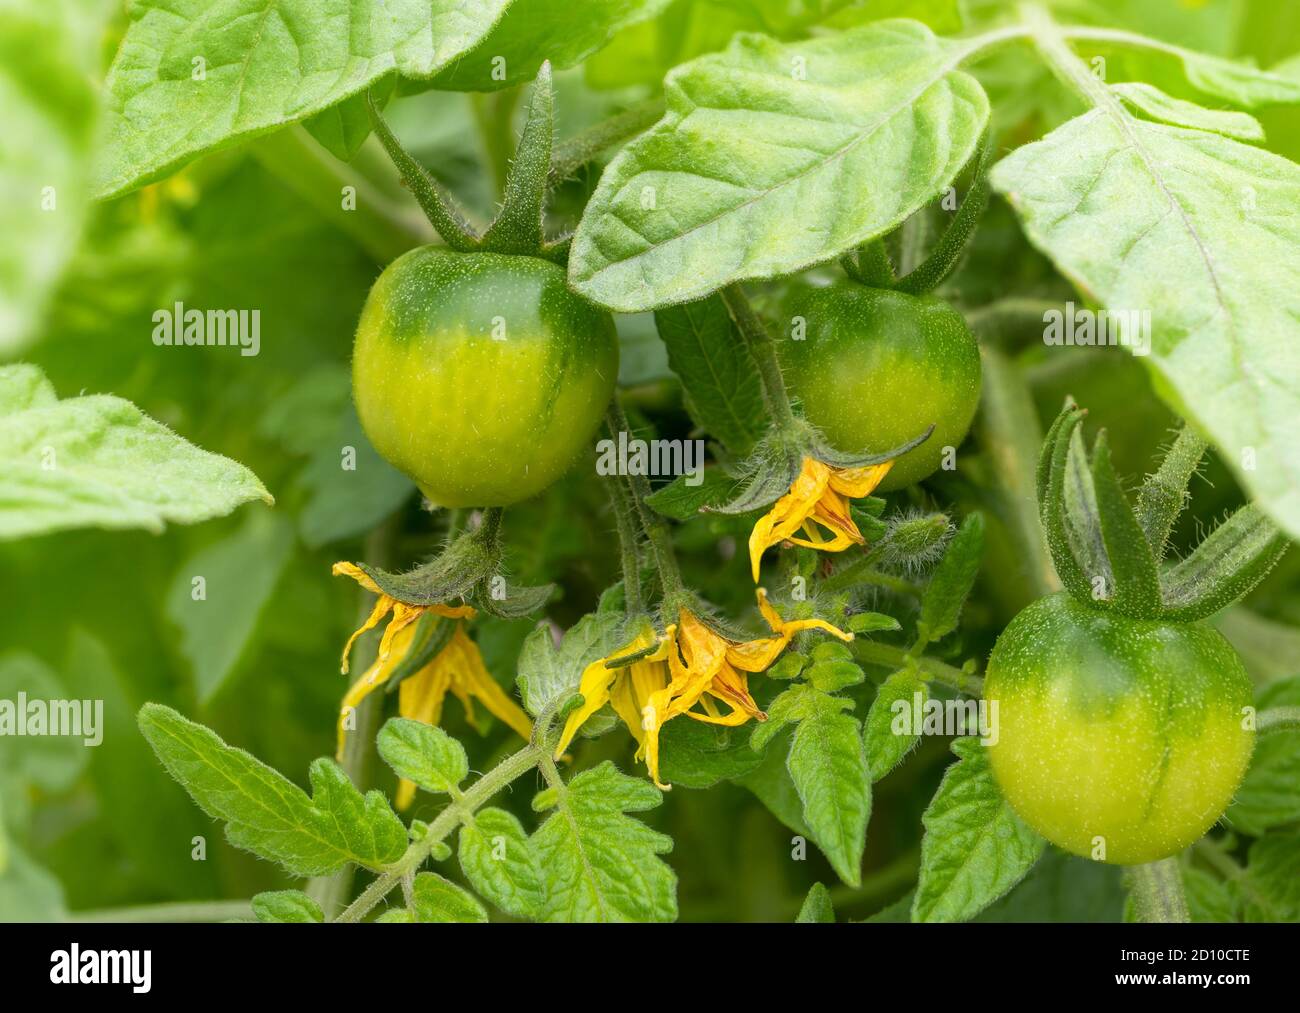 Unripe cherry tomatoes on twig. Close up. Several small green tomatoes and yellow flowers, framed with soft green tomato leaves. Cherry Bush Tomato. Stock Photo